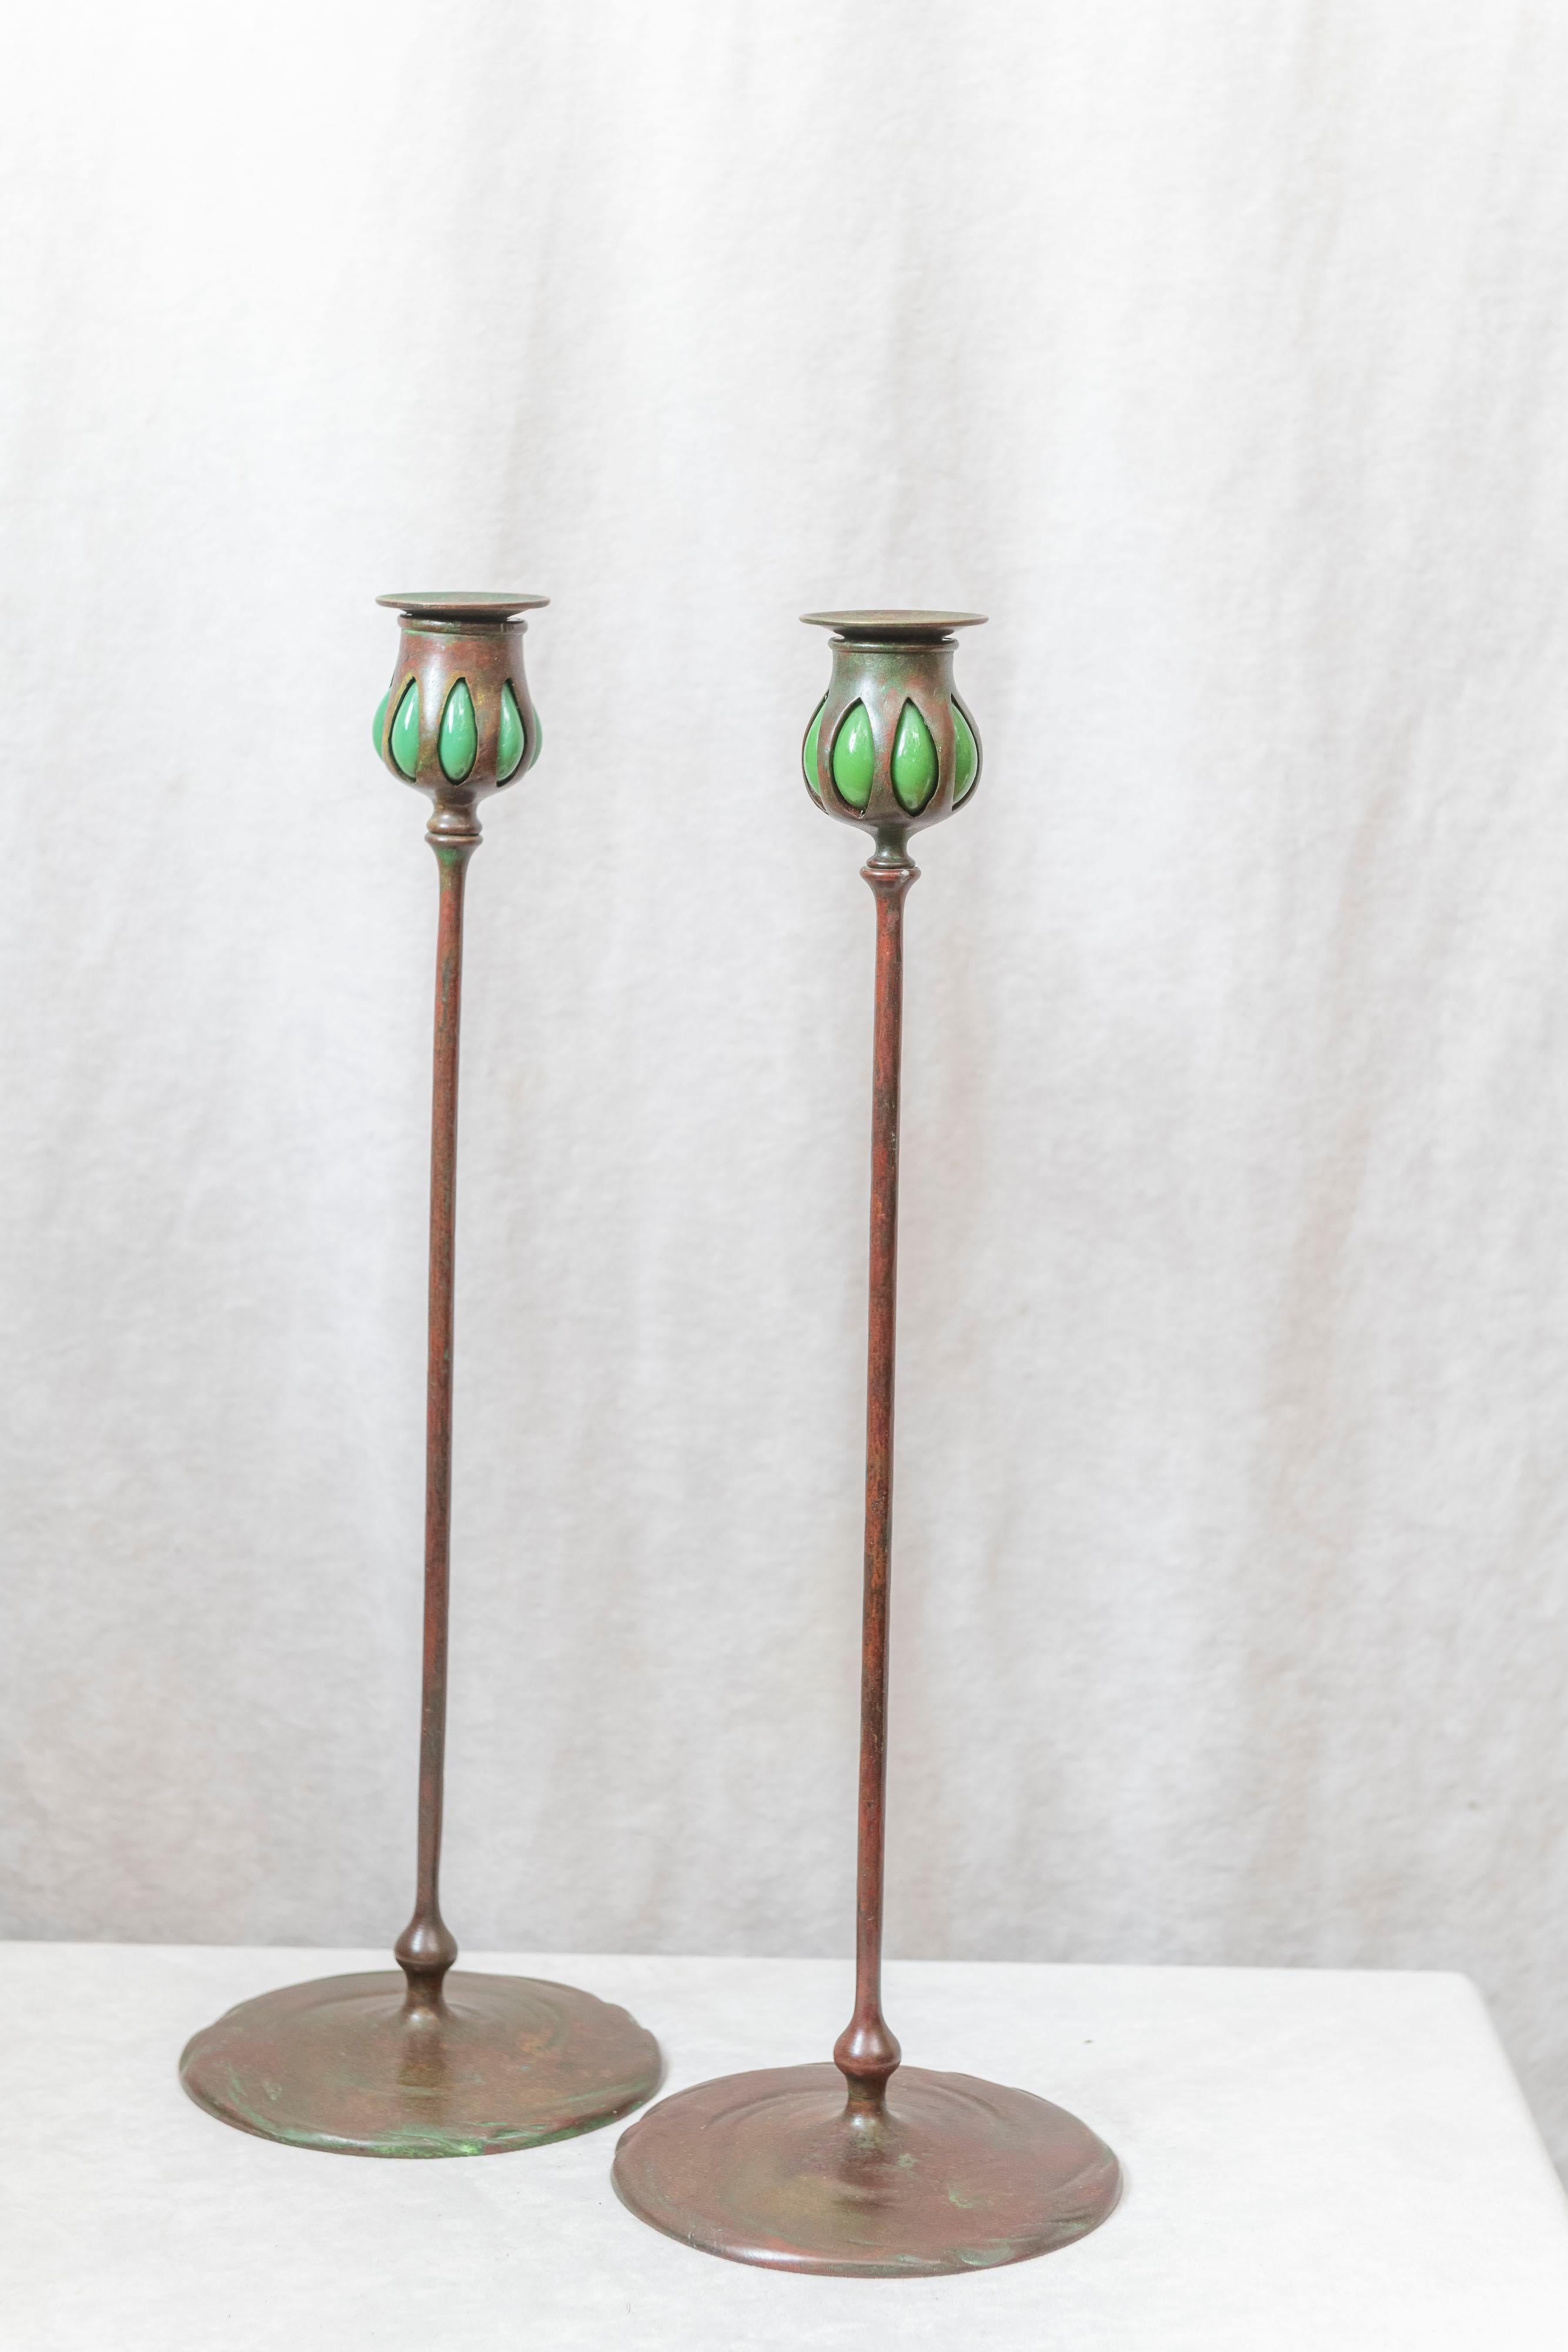 This is the real deal. A fine pair of bronze and glass candlesticks by the most famous maker of lamps, glass and accessories produced in the U.S. These candlesticks are richly patinated and have the bonus of the glass segment. They have all the